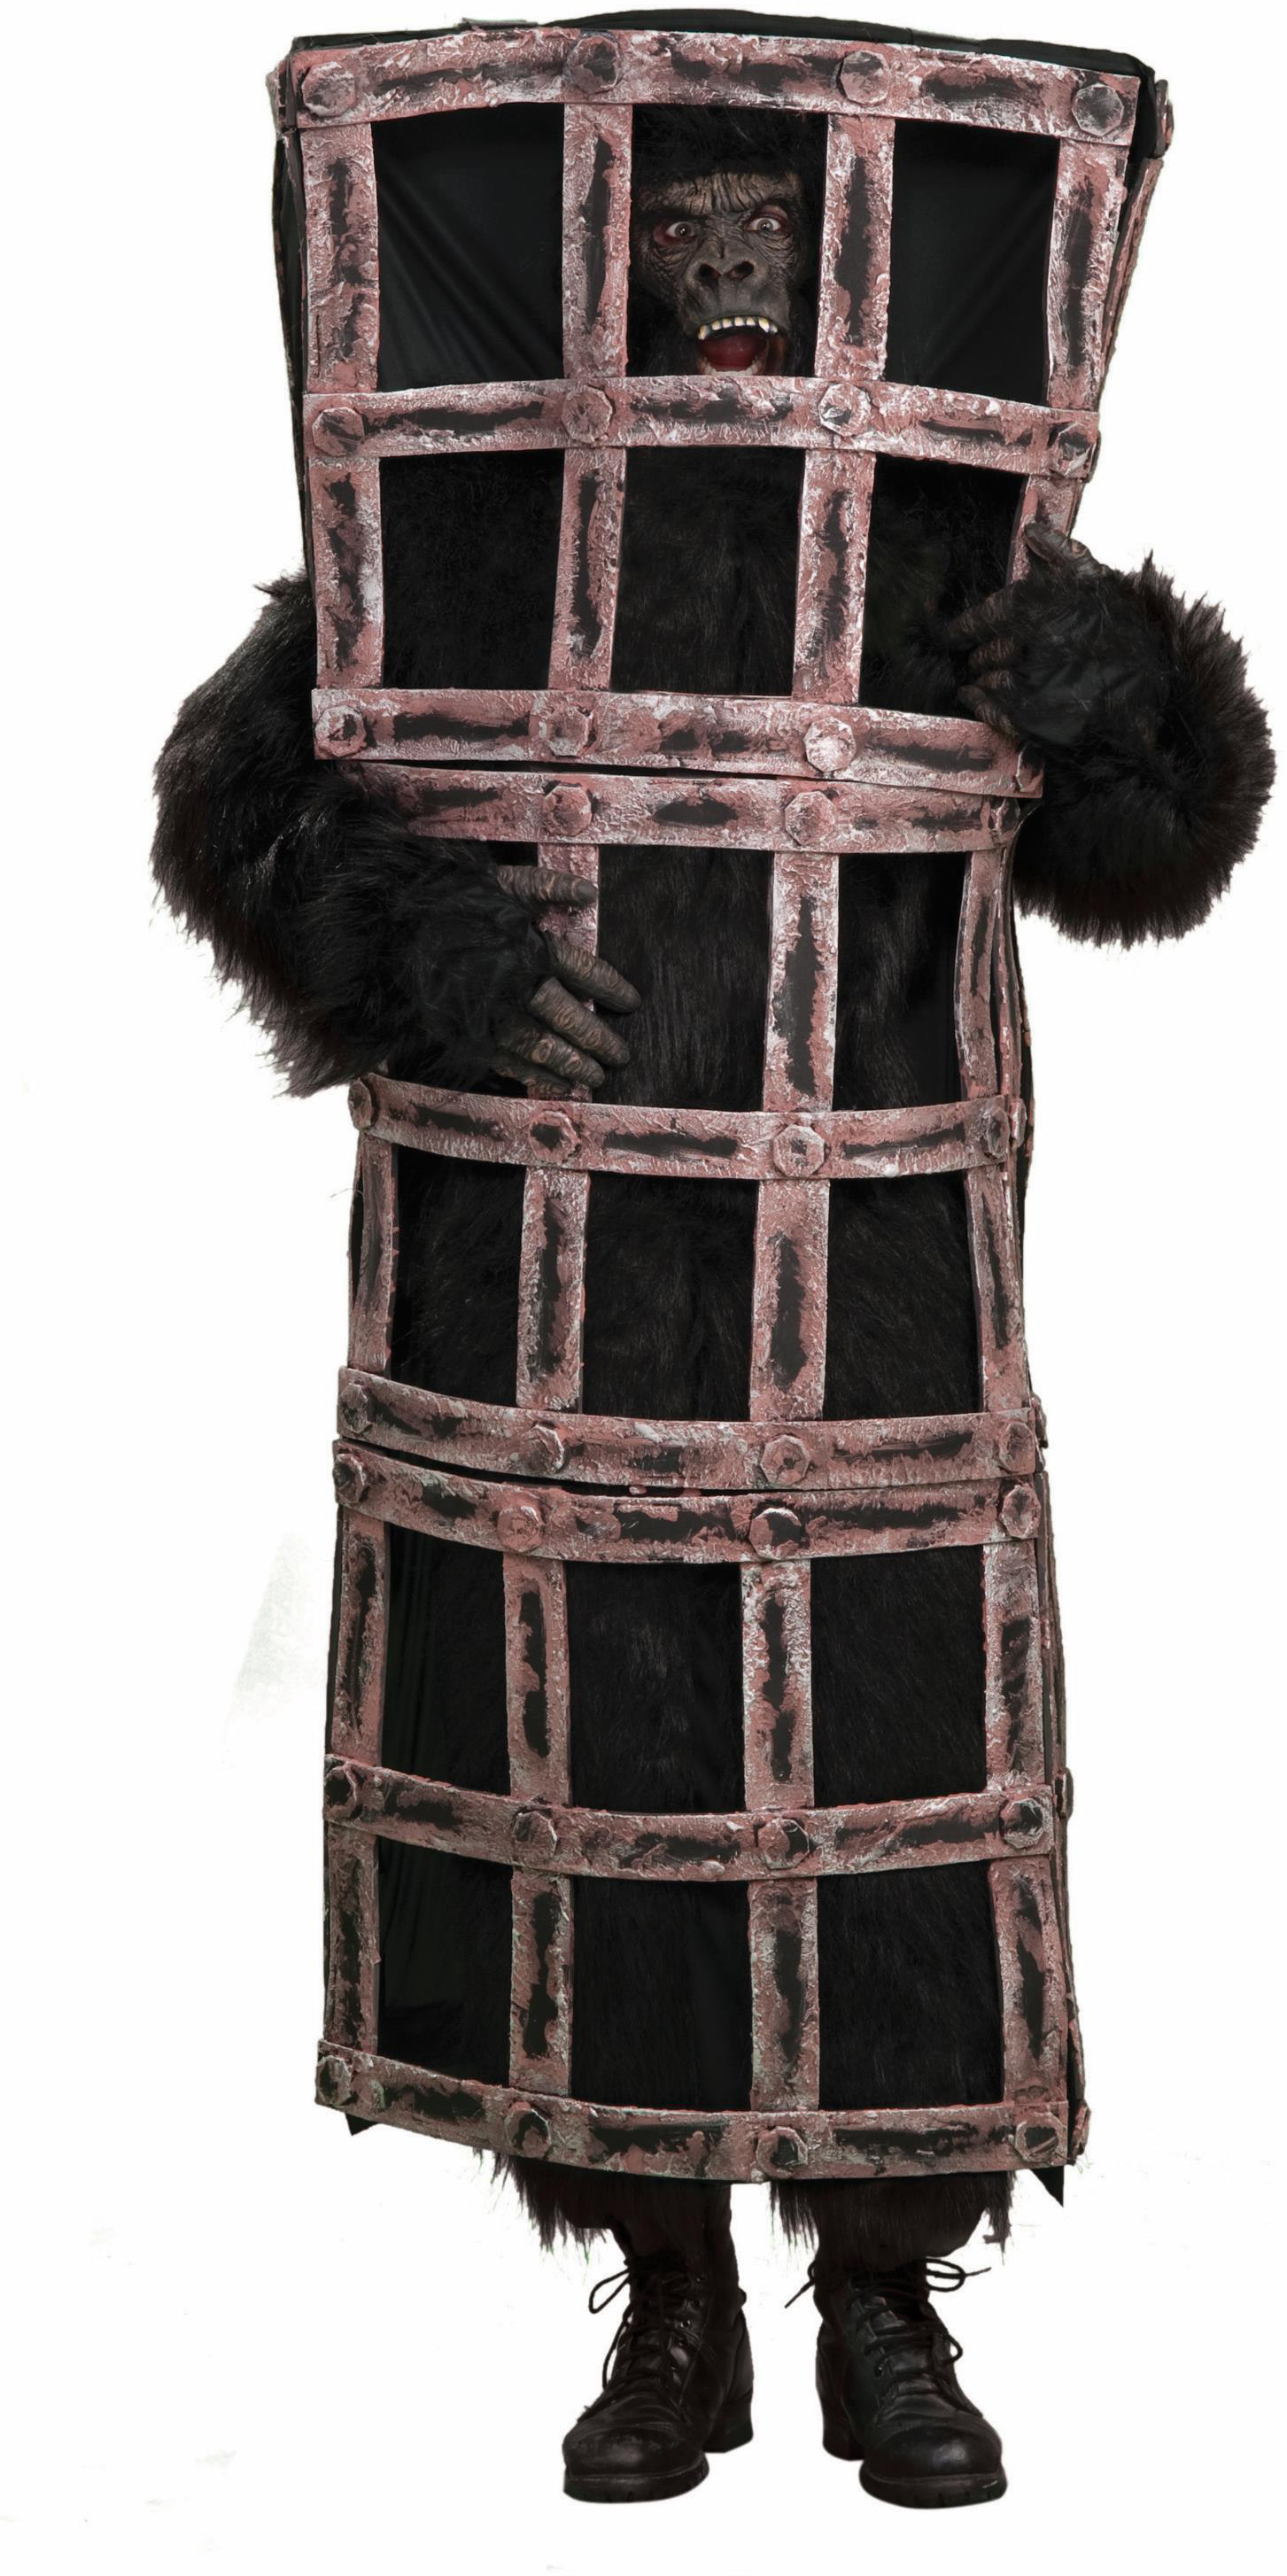 Forum Novelties Inc Men's Gorilla In Cage Adult Costume - Black - One Size Fits Most Adults